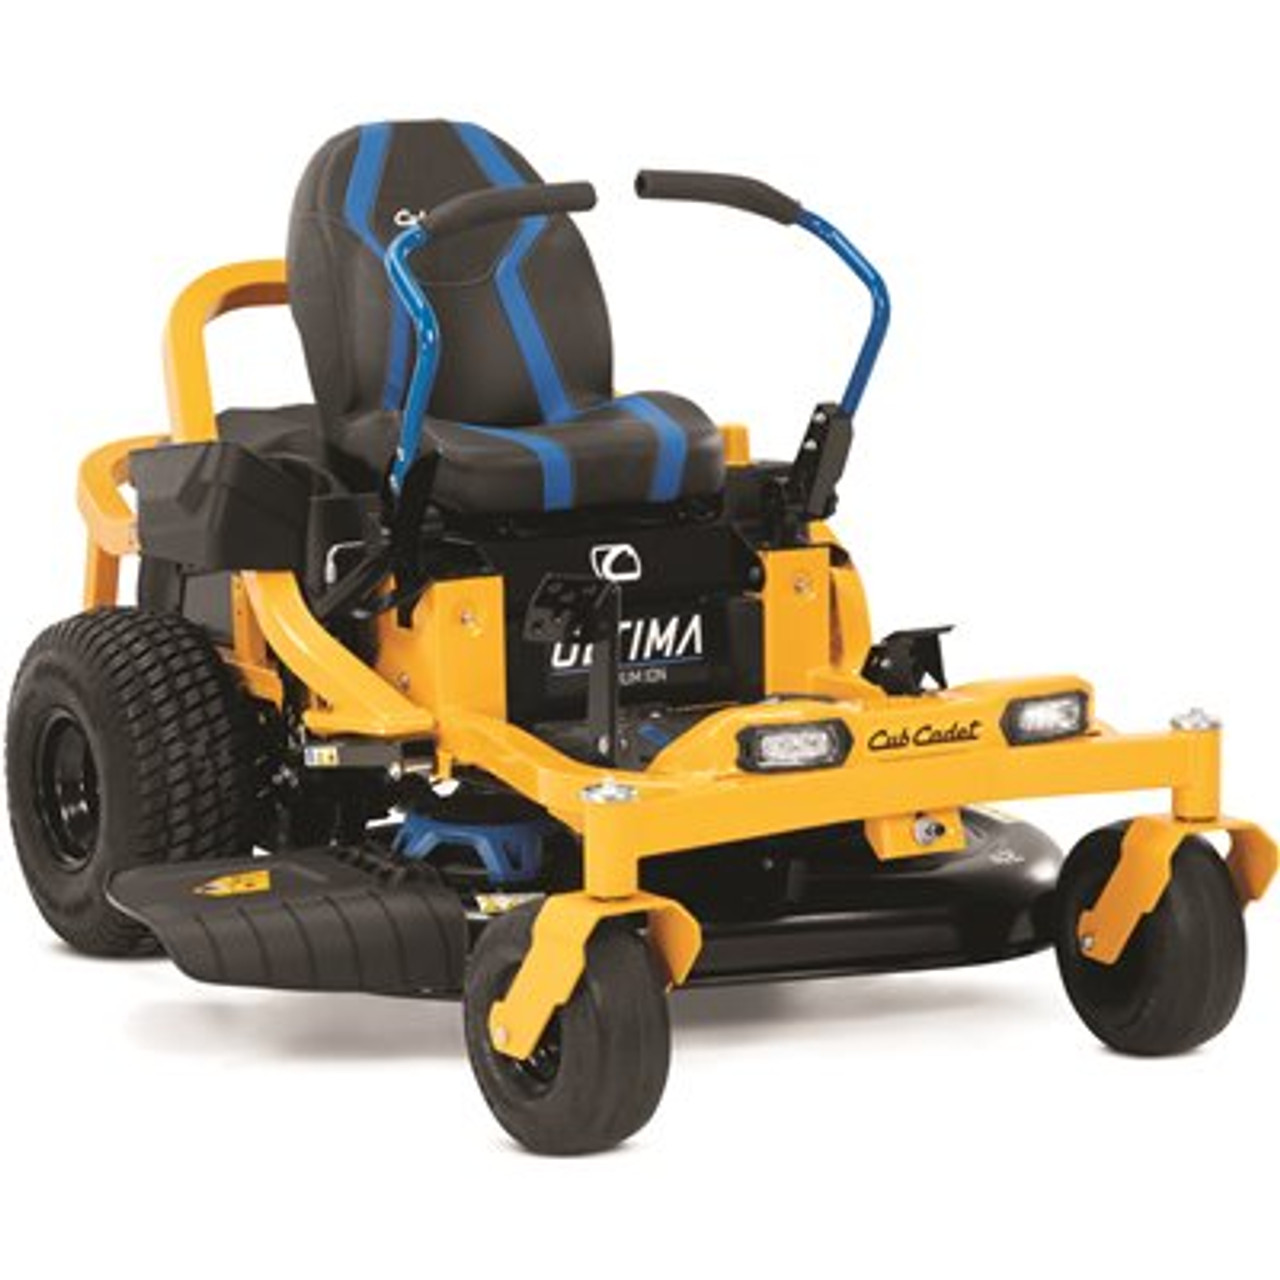 Cub Cadet Ultima Zt1 42 In. 56-Volt Max 60 Ah Battery Lithium-Ion Electric Drive Zero Turn Mower